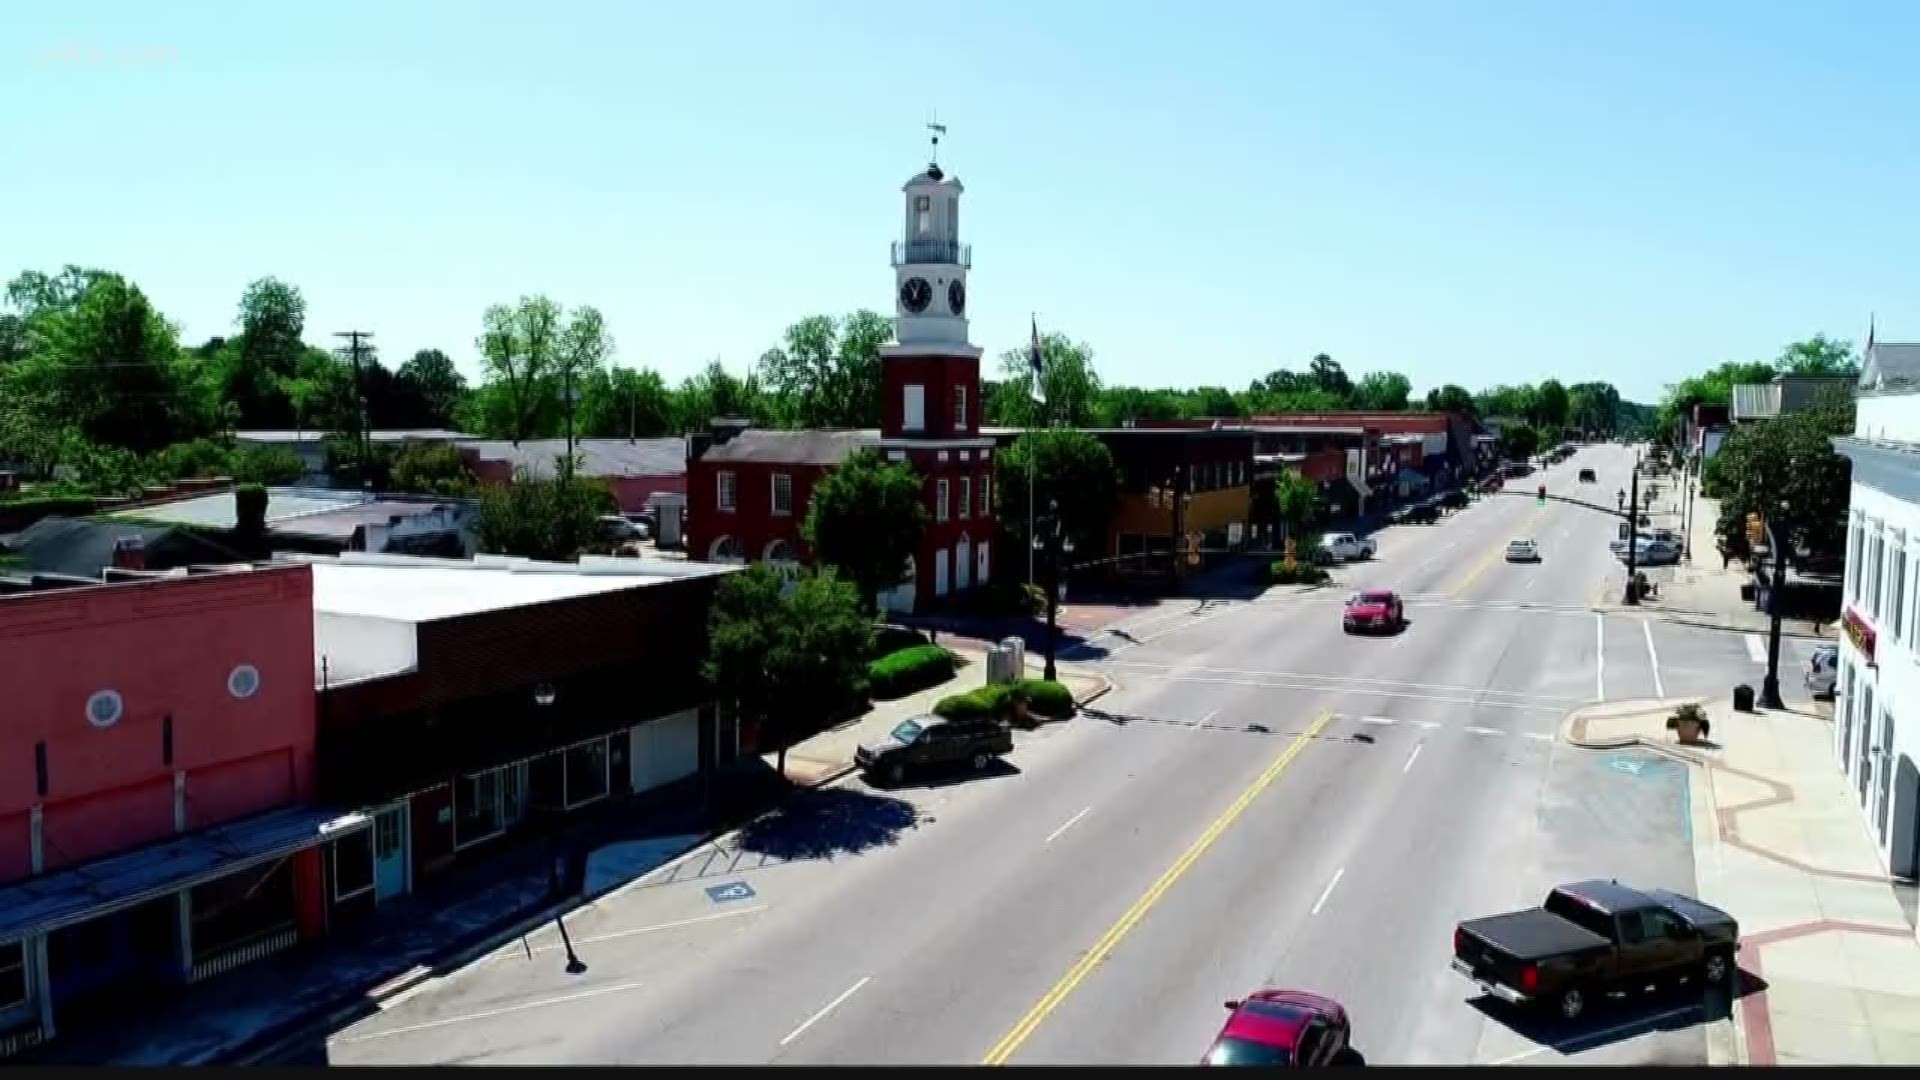 One of the counties hit the hardest from construction being stopped was Fairfield County.  News 19's Nic Jones spoke with the Chamber of Commerce to find out how it has impacted the area and what the community can expect moving forward.